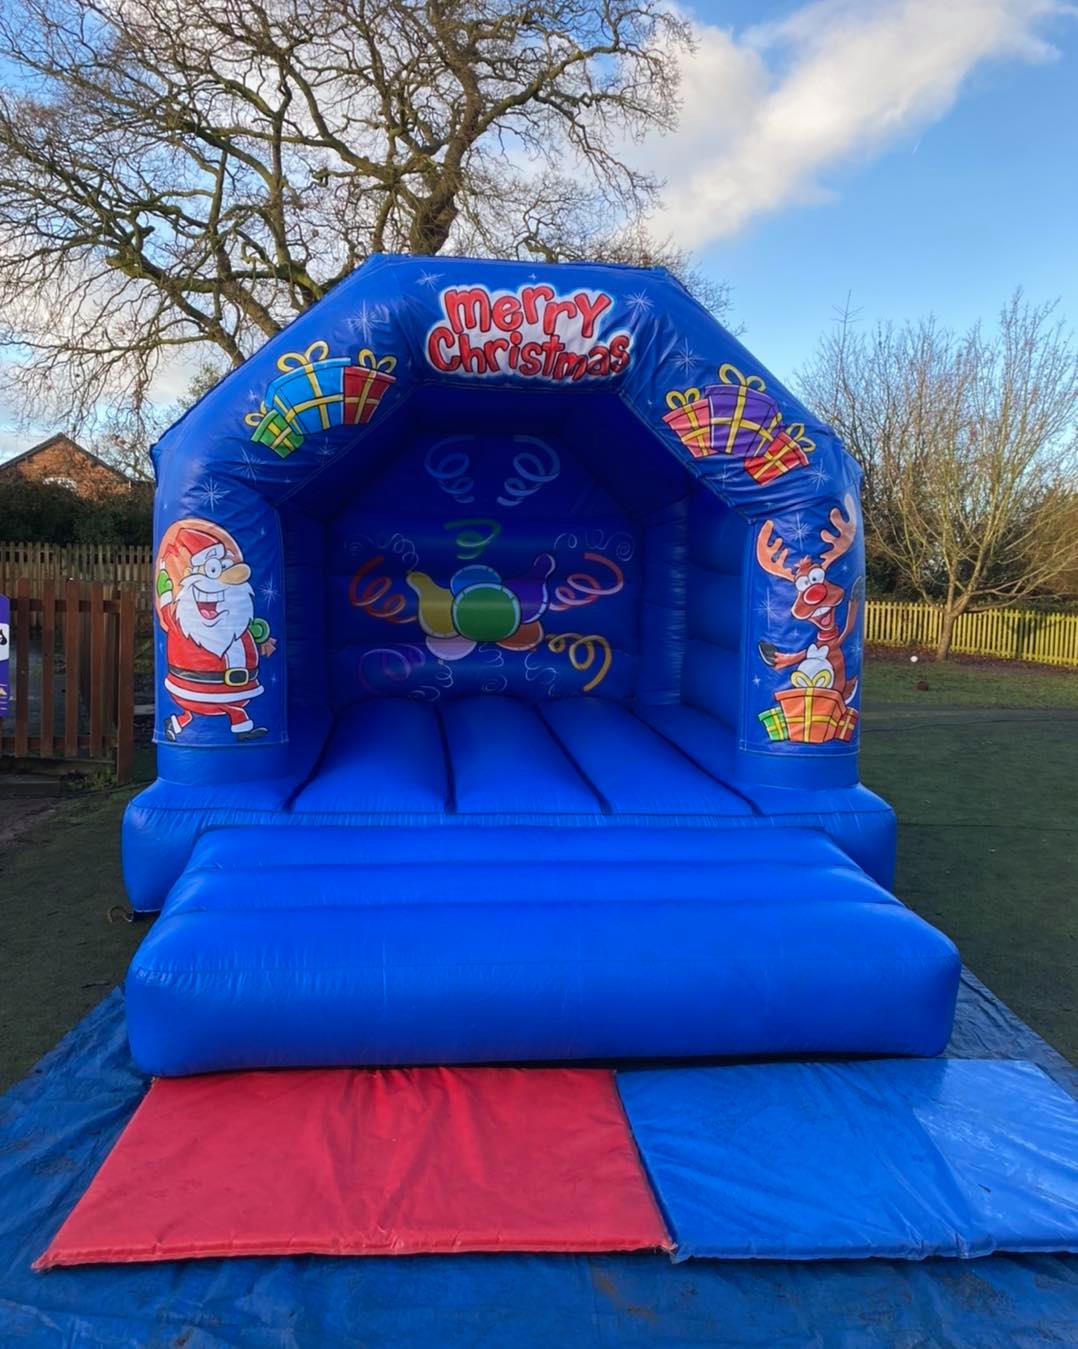 This image shows one of SJ's Leisure's bouncy castles available to hire